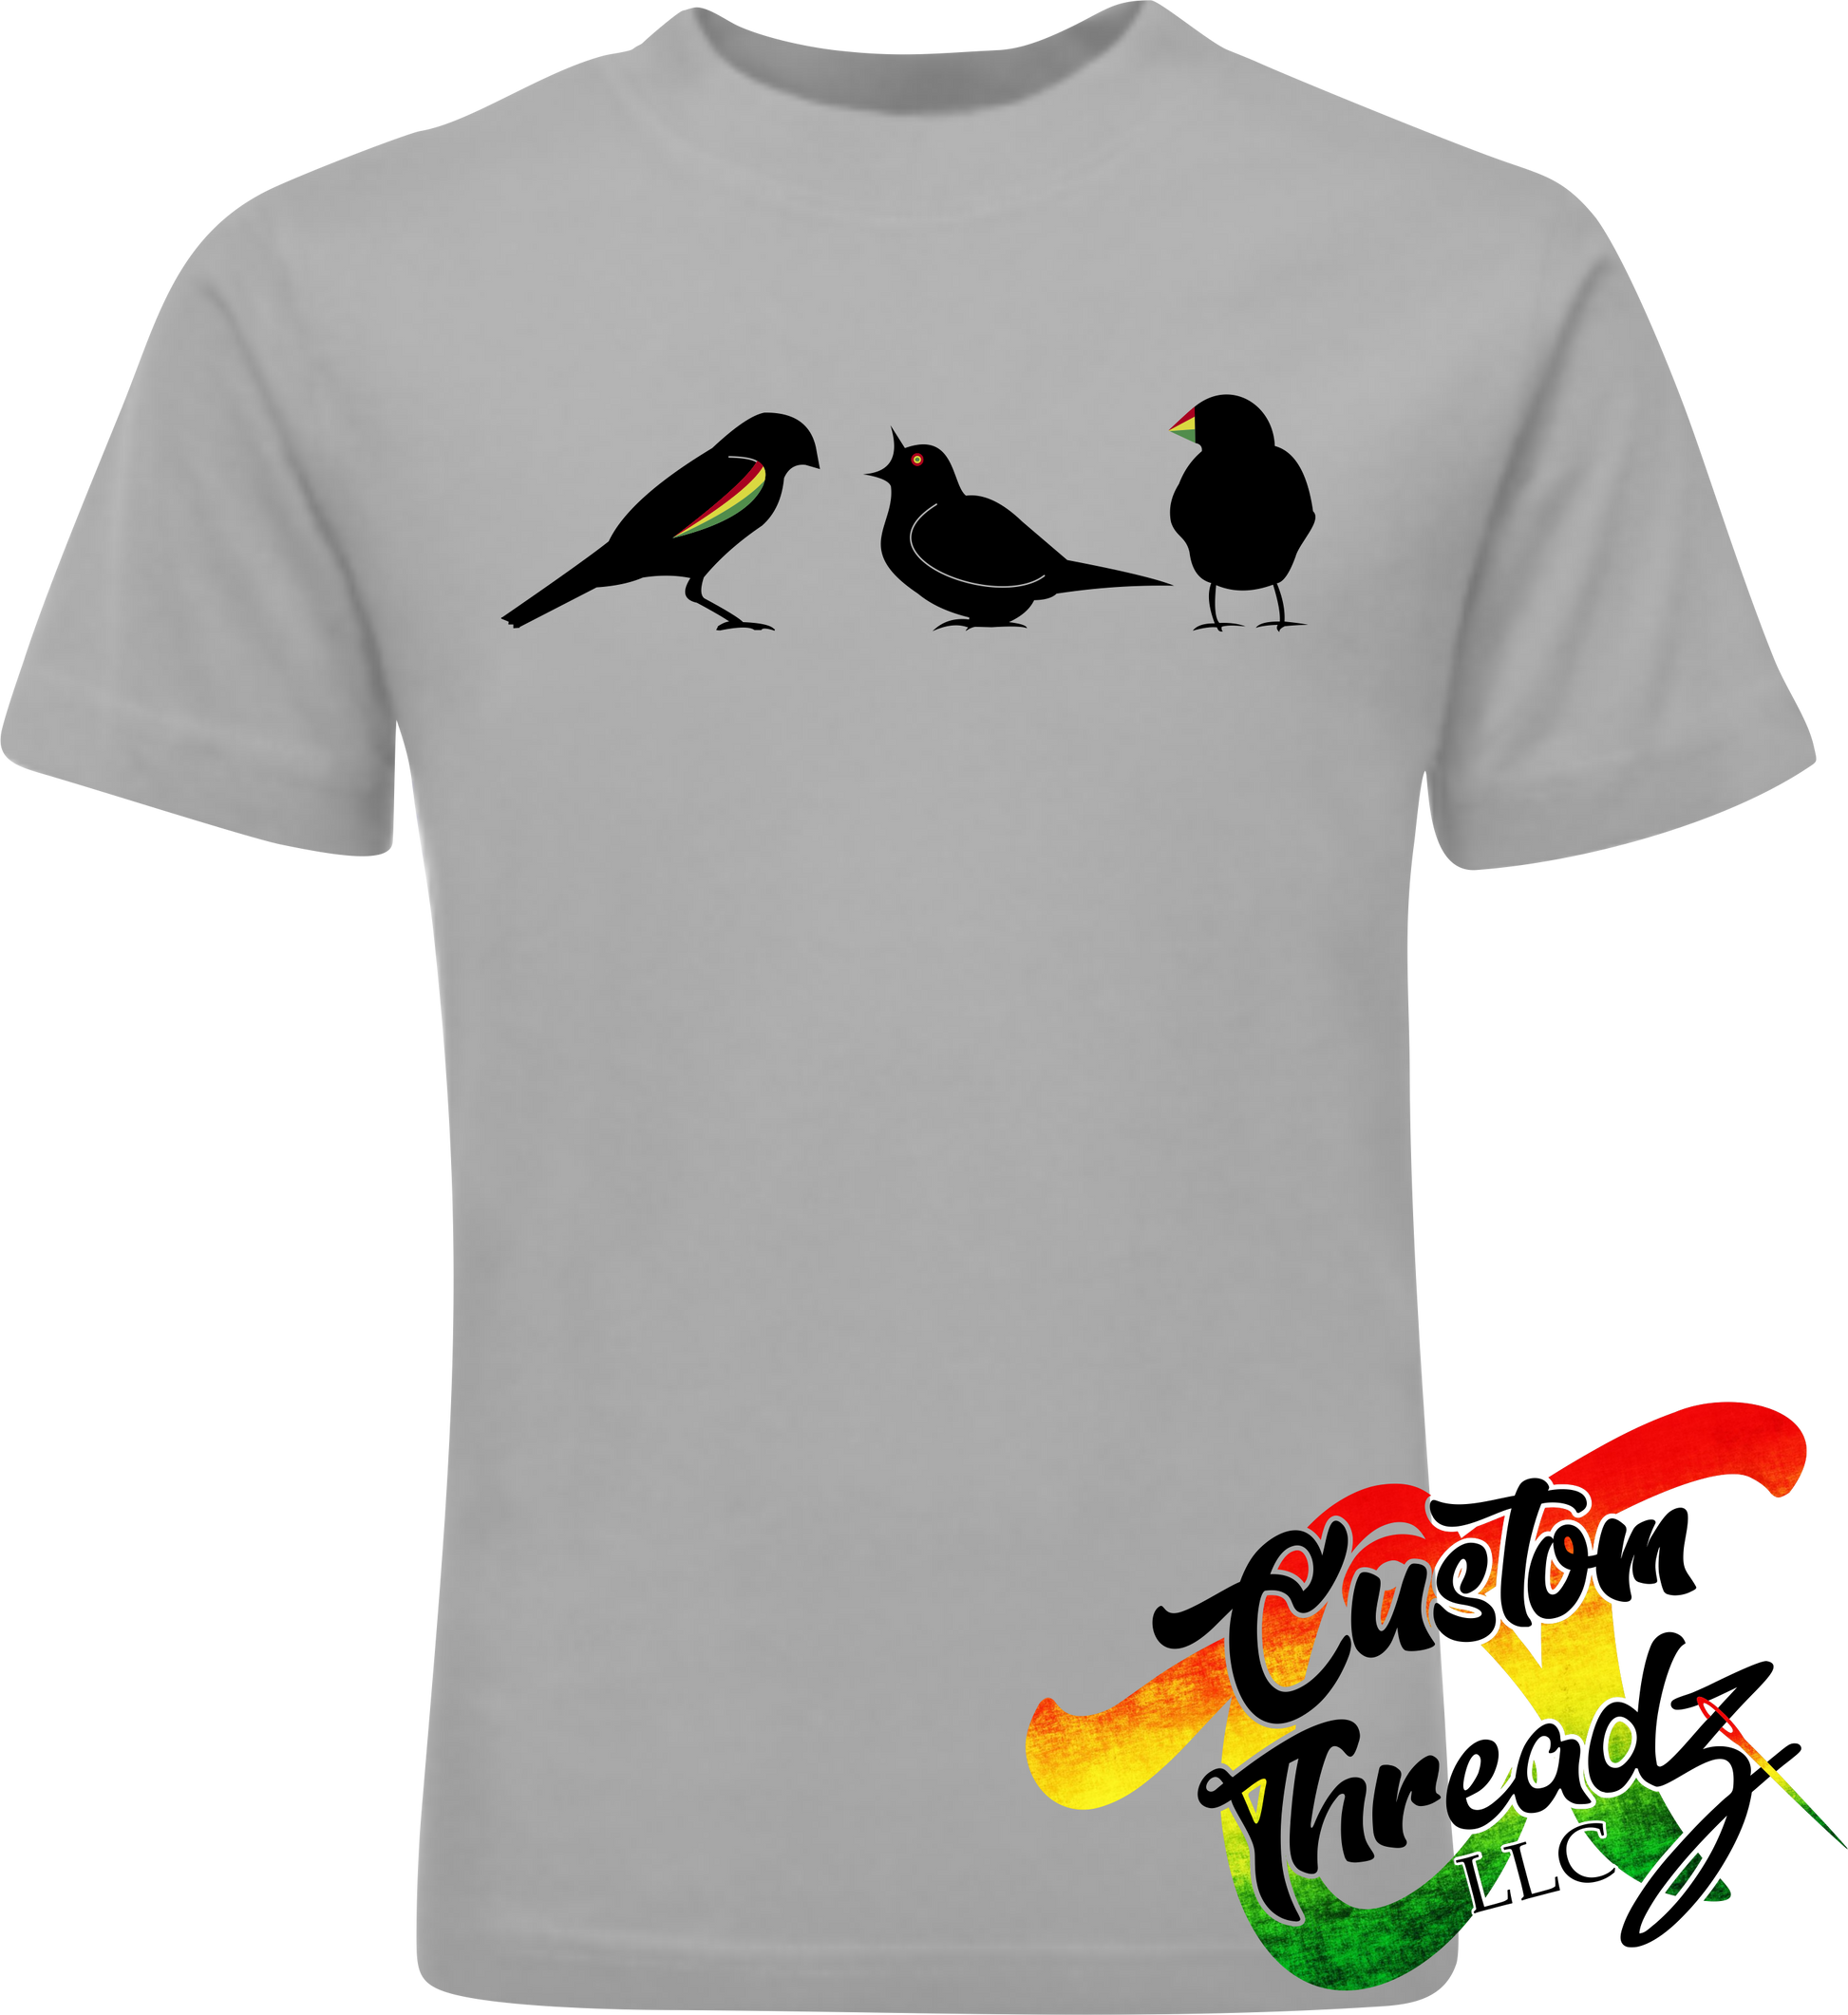 silver grey youth tee with three little birds DTG printed design